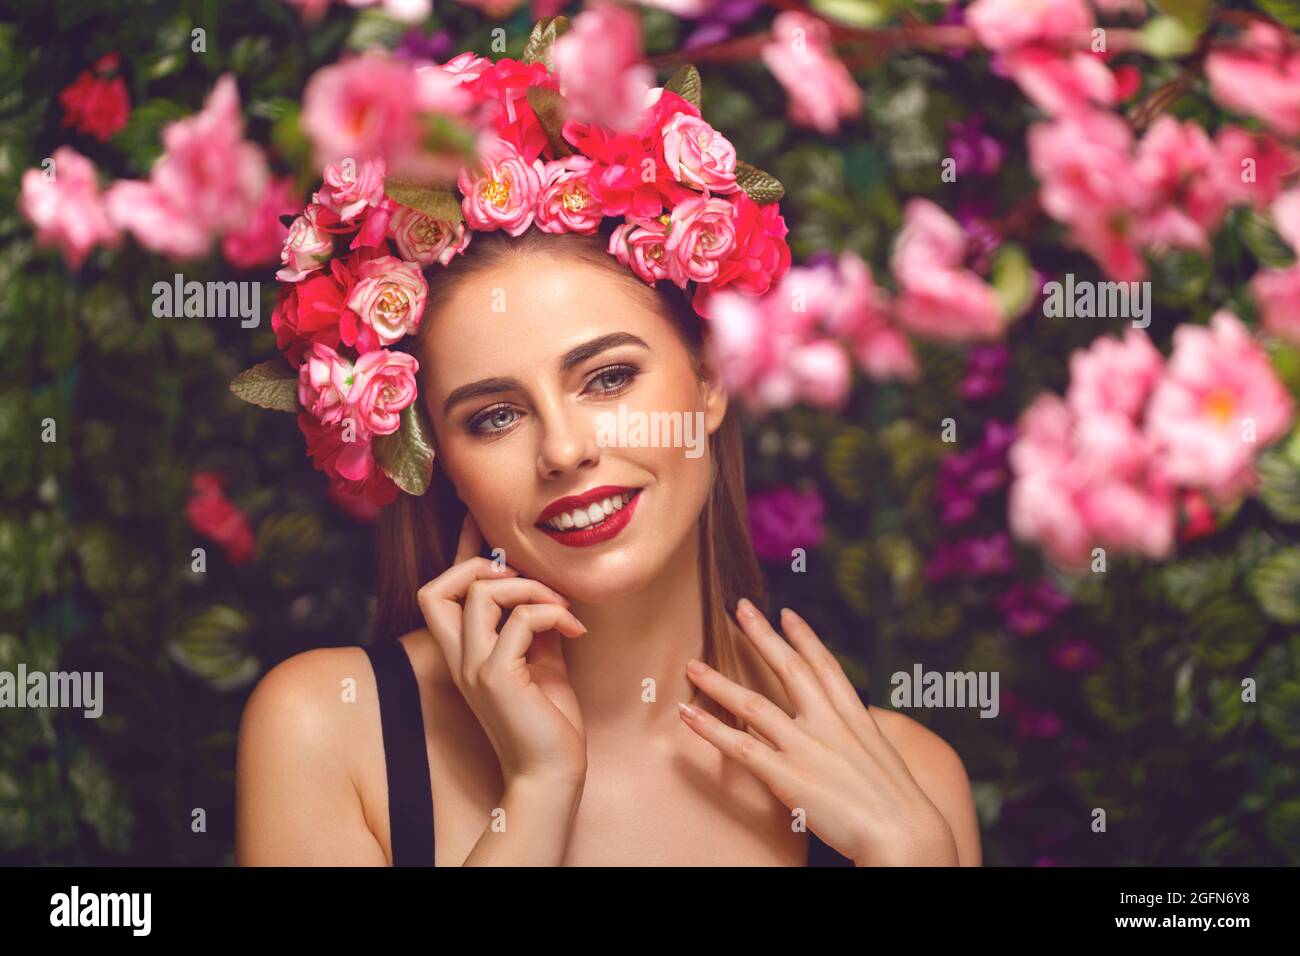 Beautiful young woman beauty and fashion portrait with wreath headband in flowers garden Stock Photo